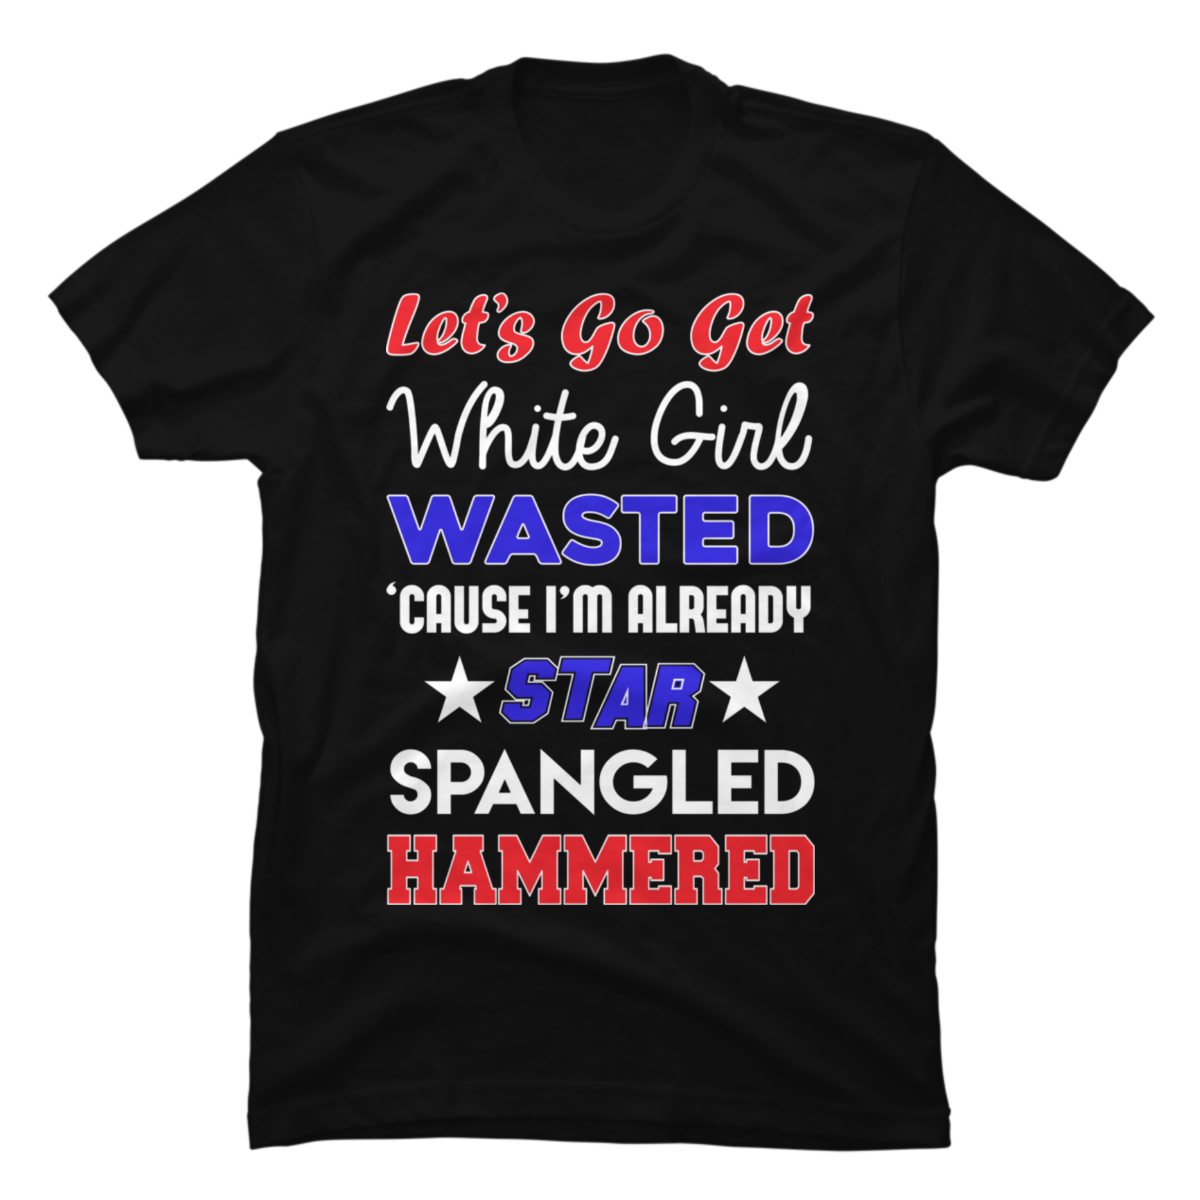 white girl wasted t shirt